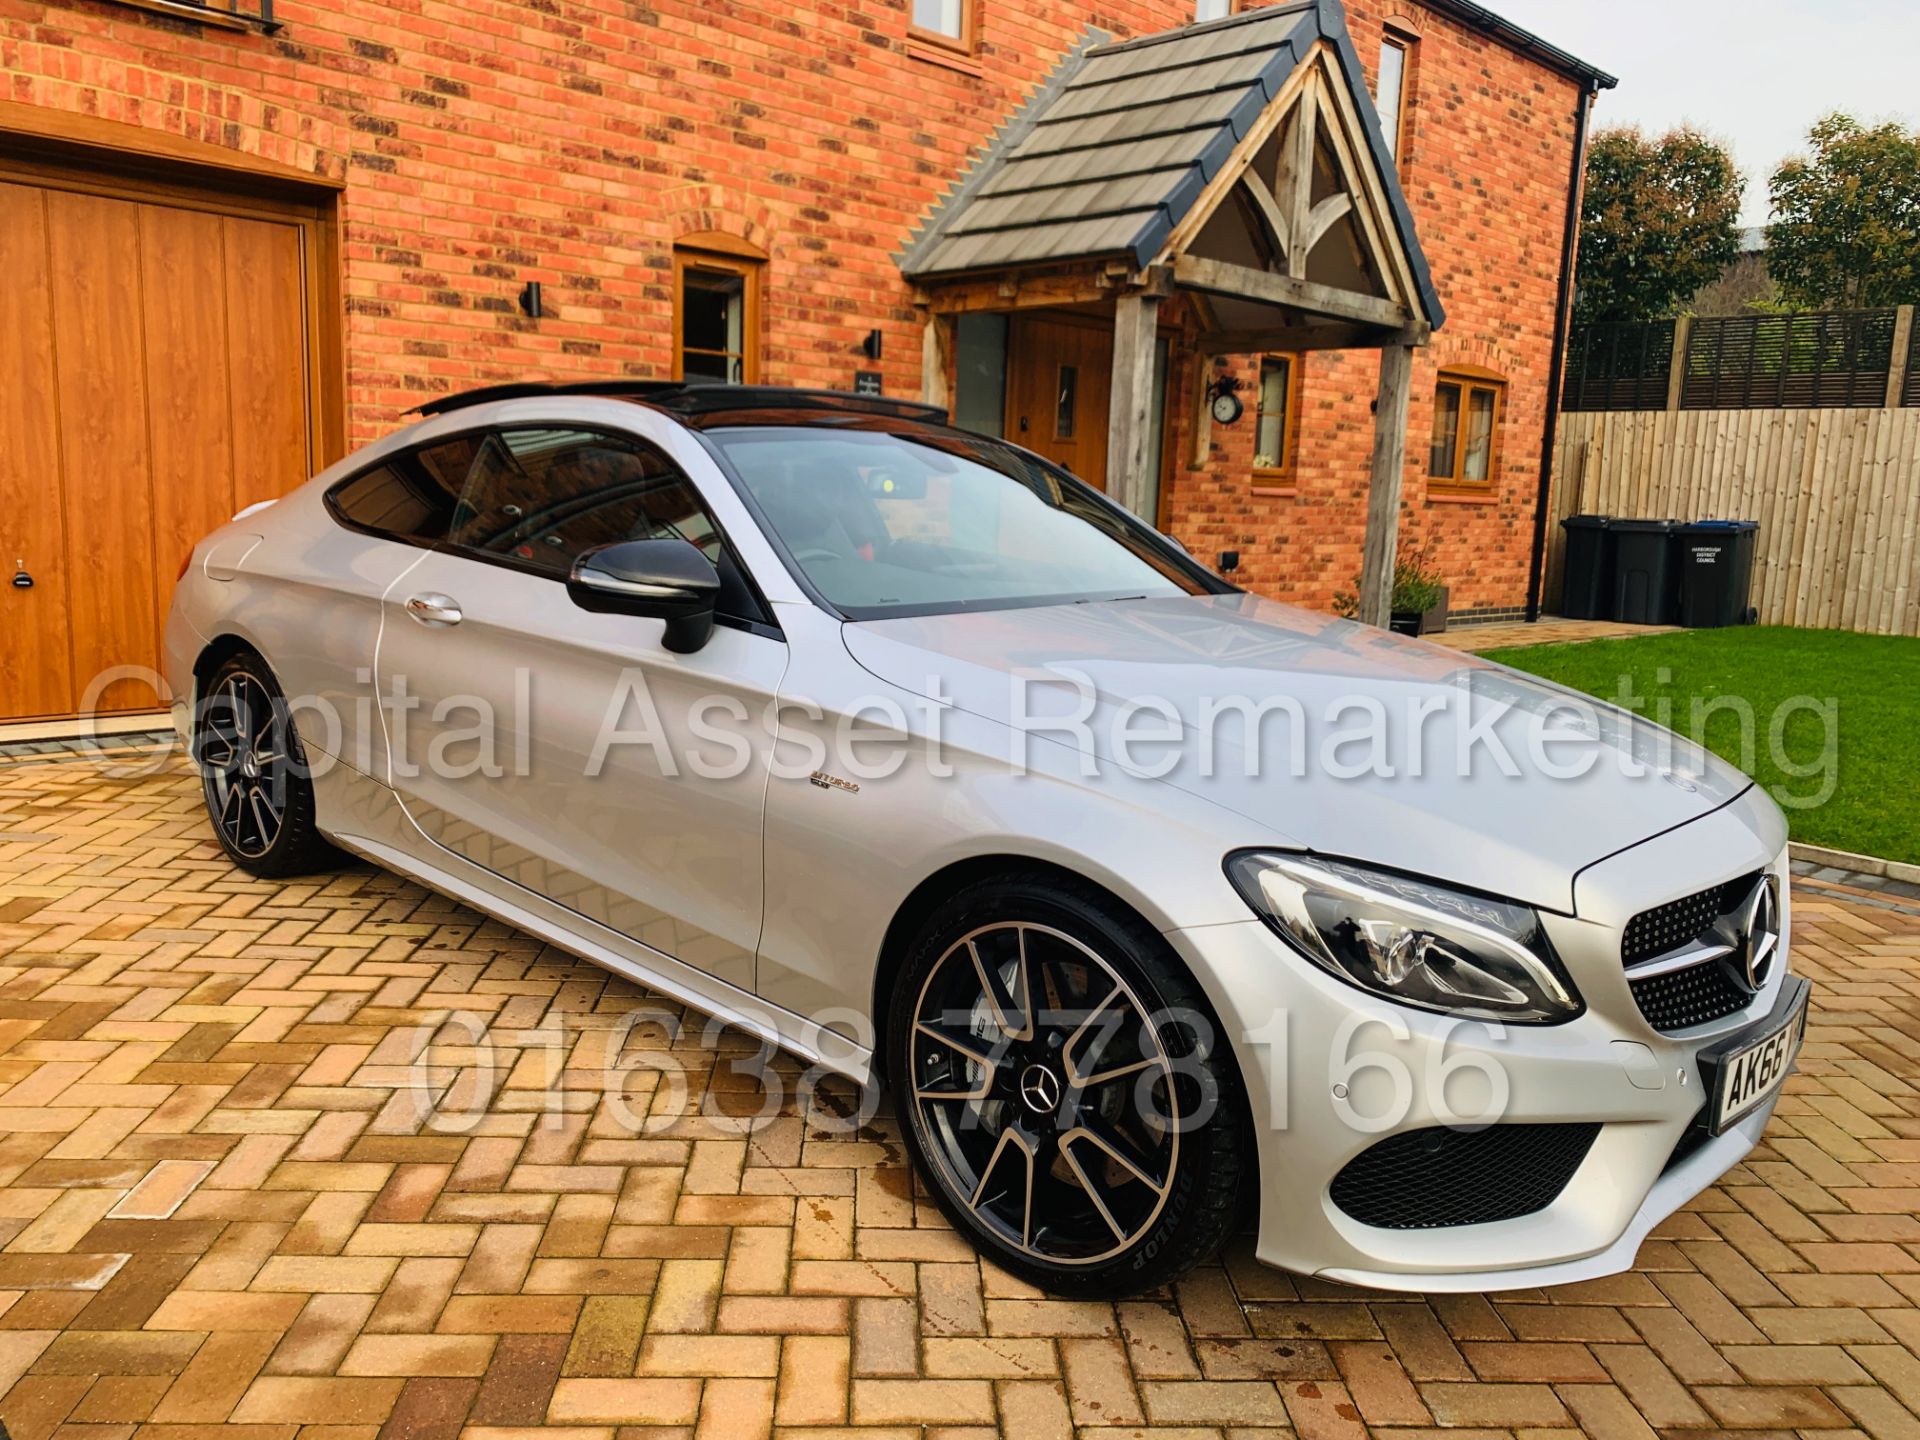 MERCEDES-BENZ C43 AMG *PREMIUM 4 MATIC* COUPE (2017) '9-G AUTO - LEATHER - SAT NAV' **FULLY LOADED** - Image 2 of 46